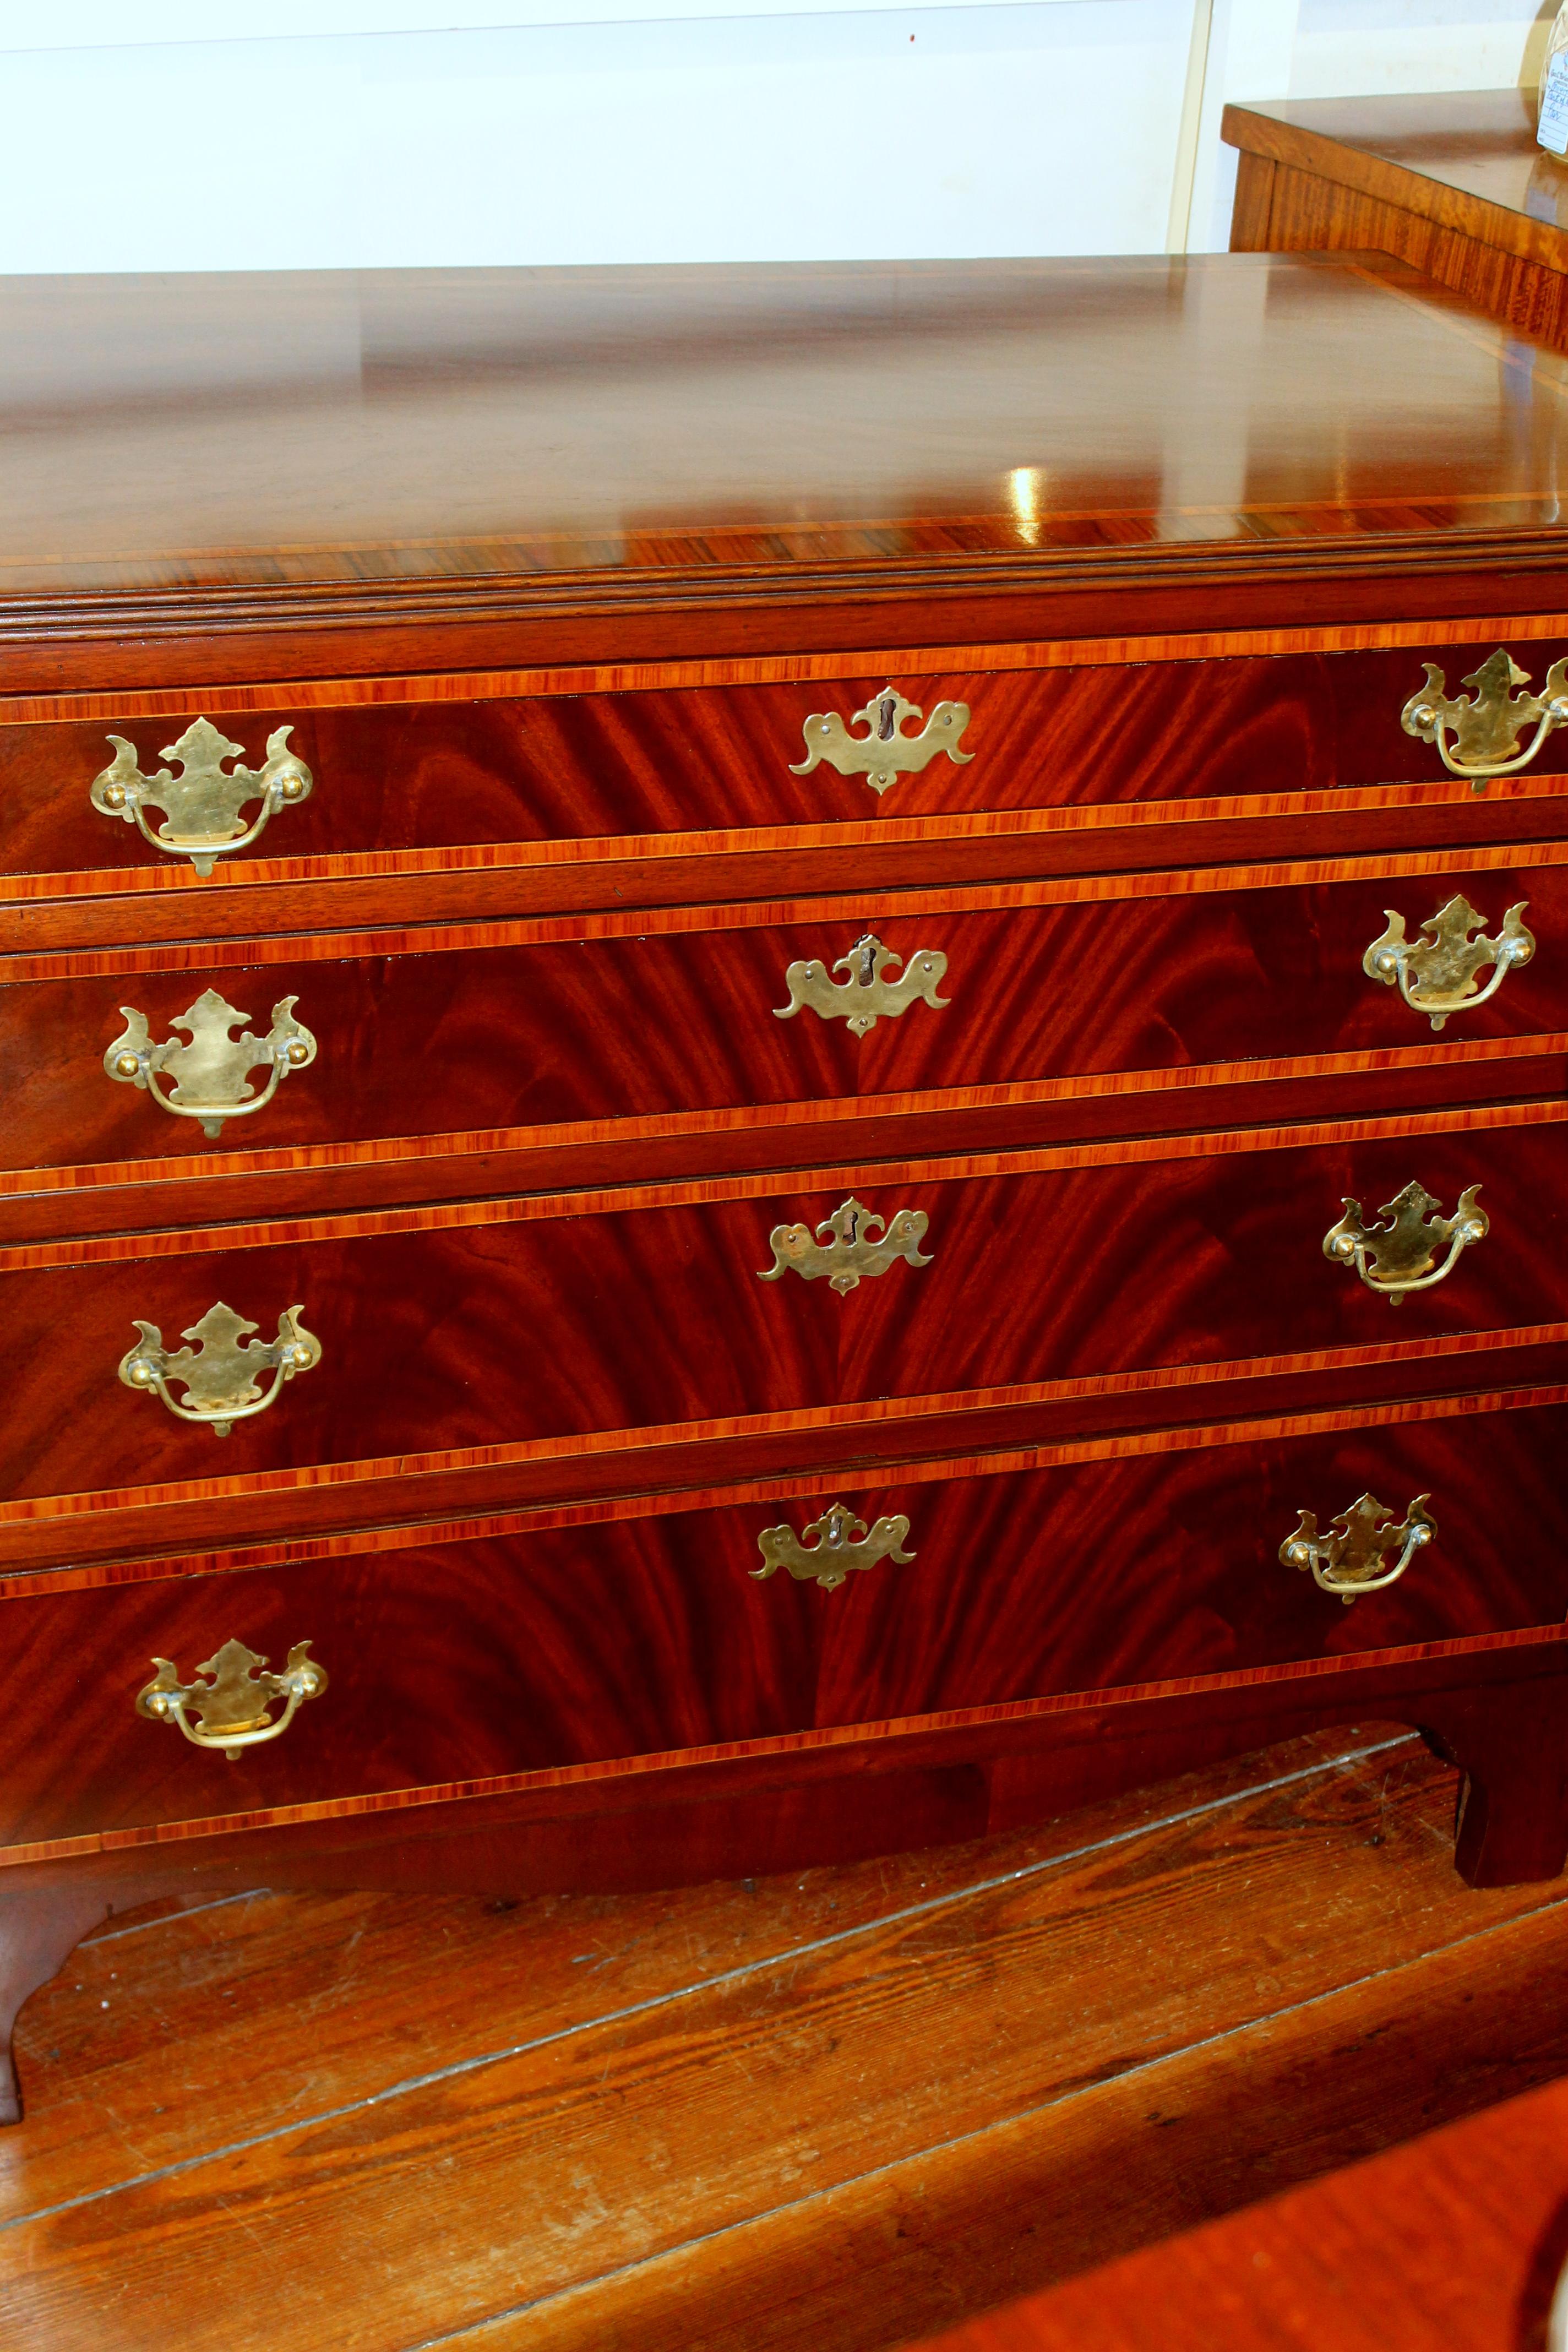 Superb antique English inlaid book-matched flame mahogany chest of drawers of handsome, smaller proportions and beautifully graduated drawers.

Please note lovely tulipwood inlay and rosewood cross-banding top and drawer fronts.